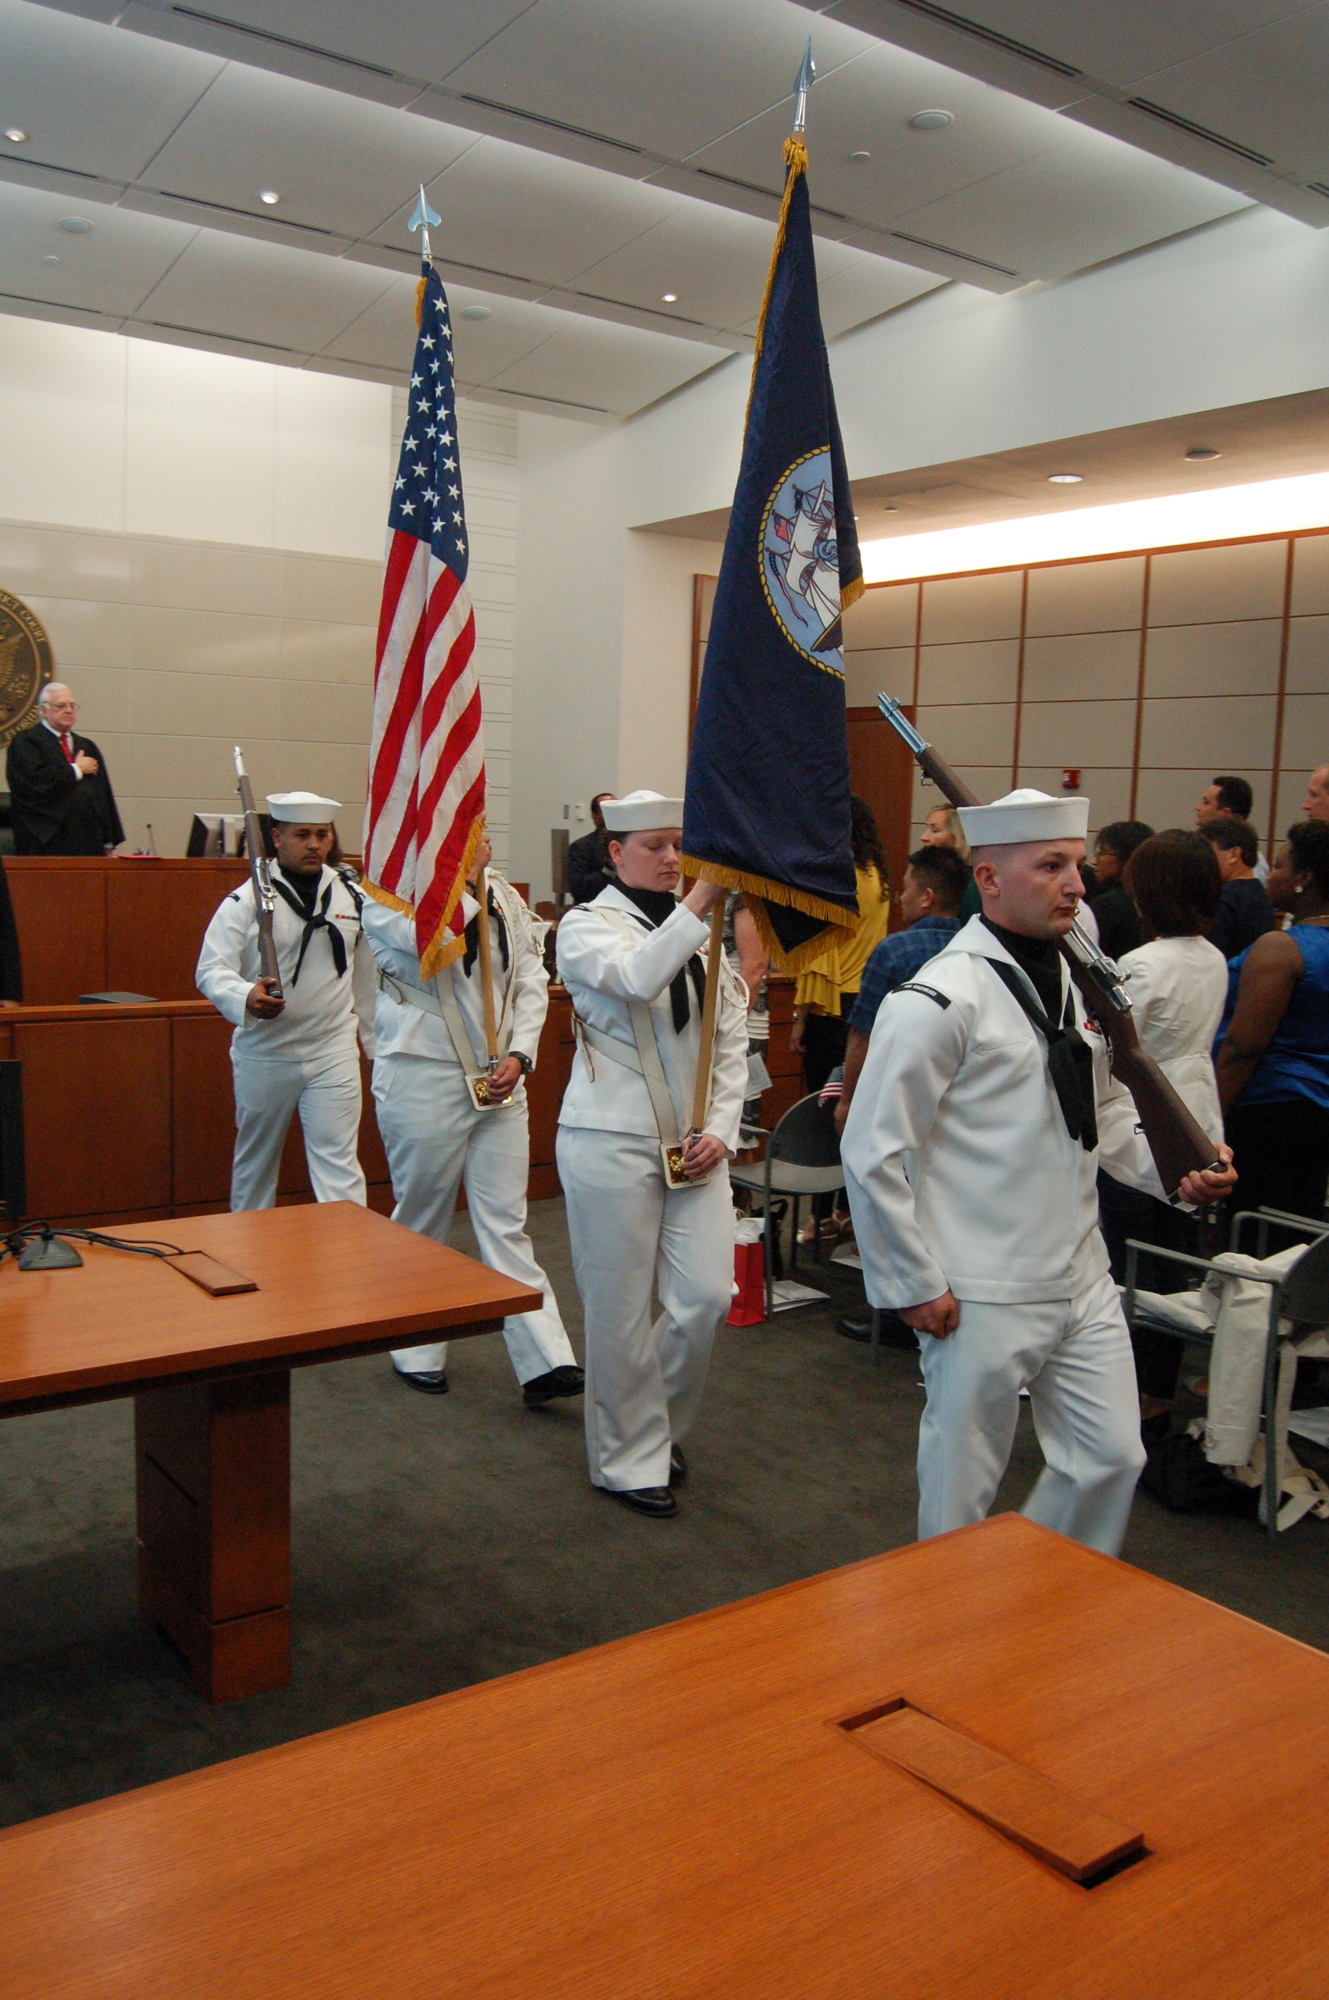 The color guard from the Fleet Readiness Center at Naval Air Station Jacksonville opened and closed the ceremony.